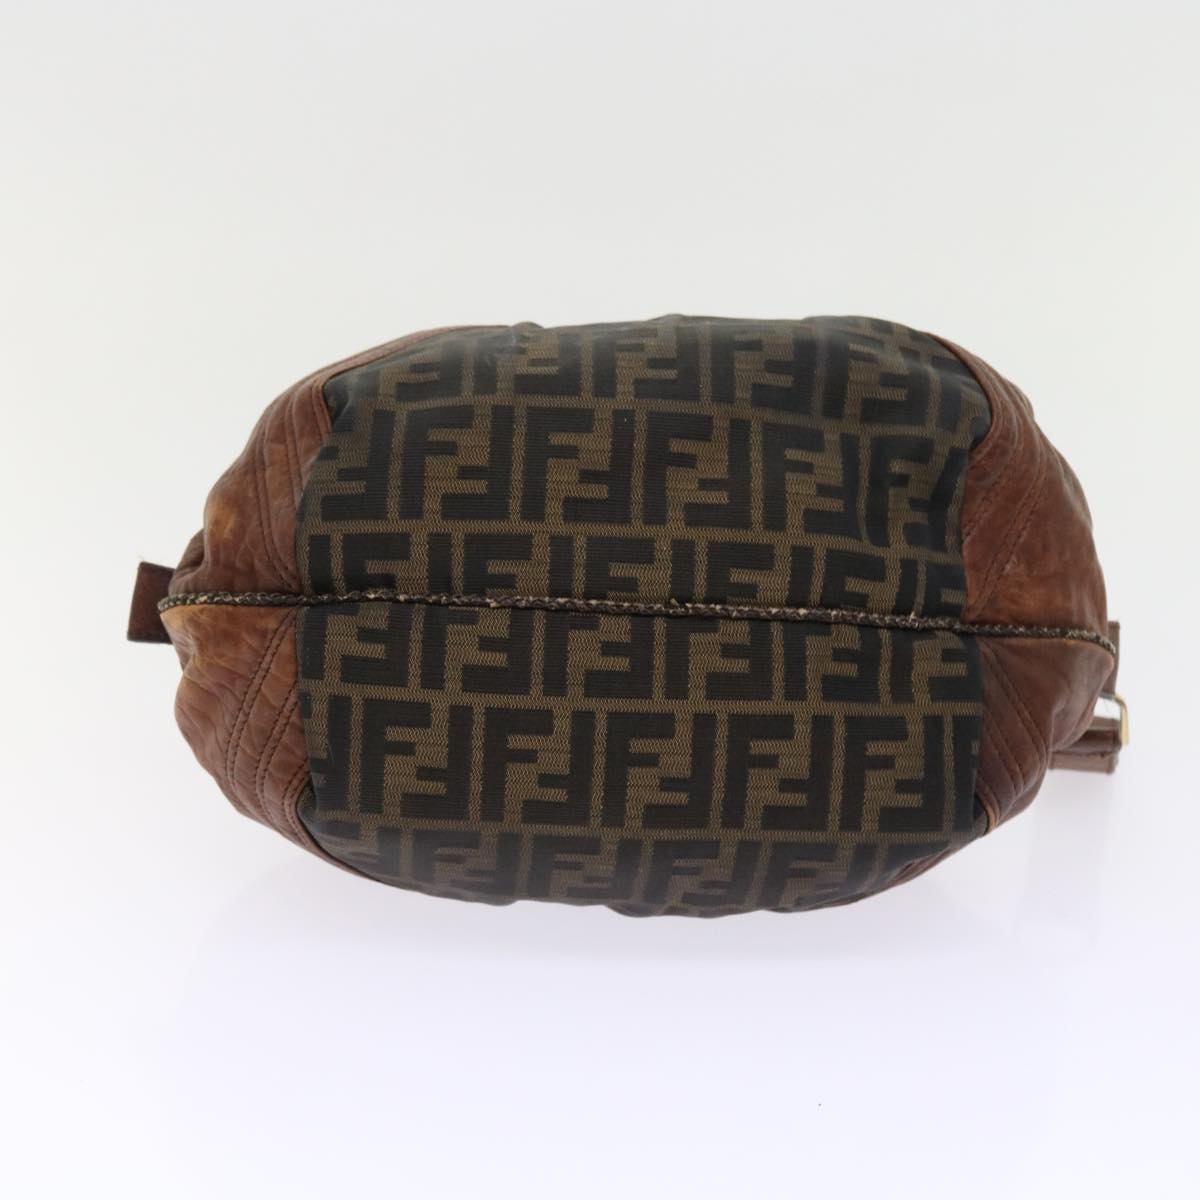 FENDI Zucca Canvas Spy Hand Bag Nylon Leather Brown Auth bs8264